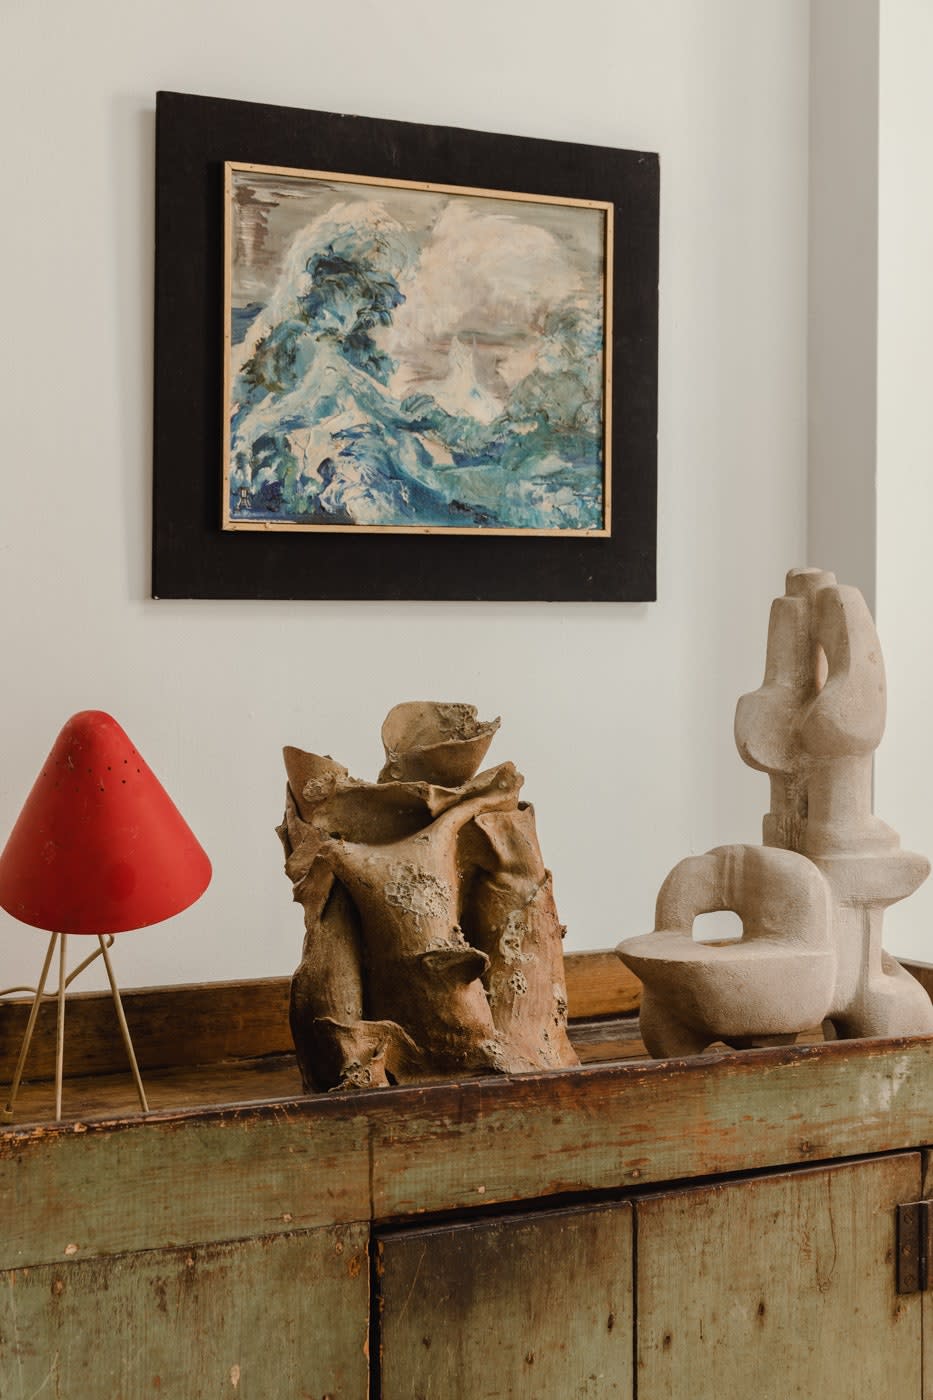 “I found this crazy ceramic that reminds me of the ceramist Peter Voulkos,” says Jonny of the centerpiece sandwiched between a 1960s metal lamp and a stone sculpture by Bernice Dritz-Epstein. “It’s just wild and weird. I got that at Brimfield from a dealer friend.”